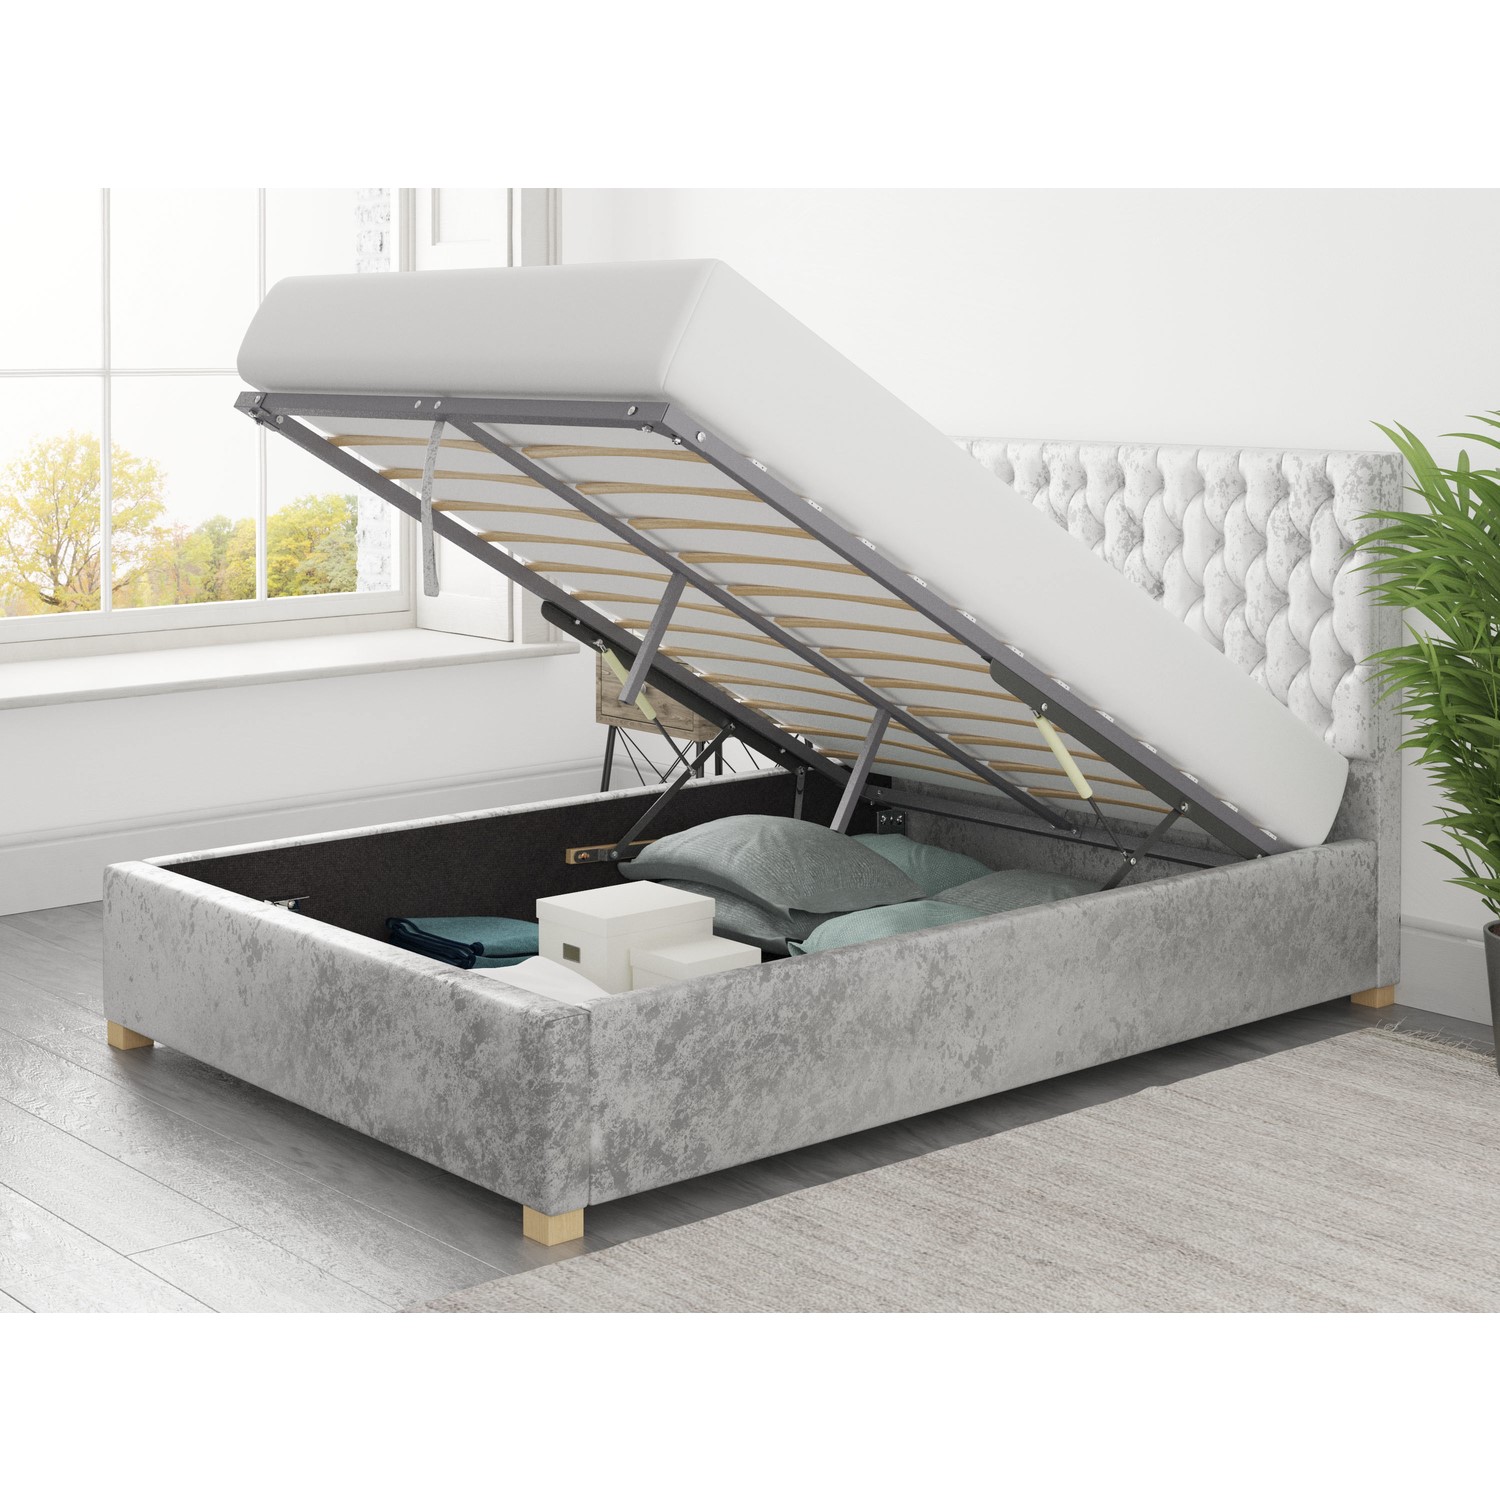 Read more about Silver crushed velvet super king size ottoman bed angel aspire